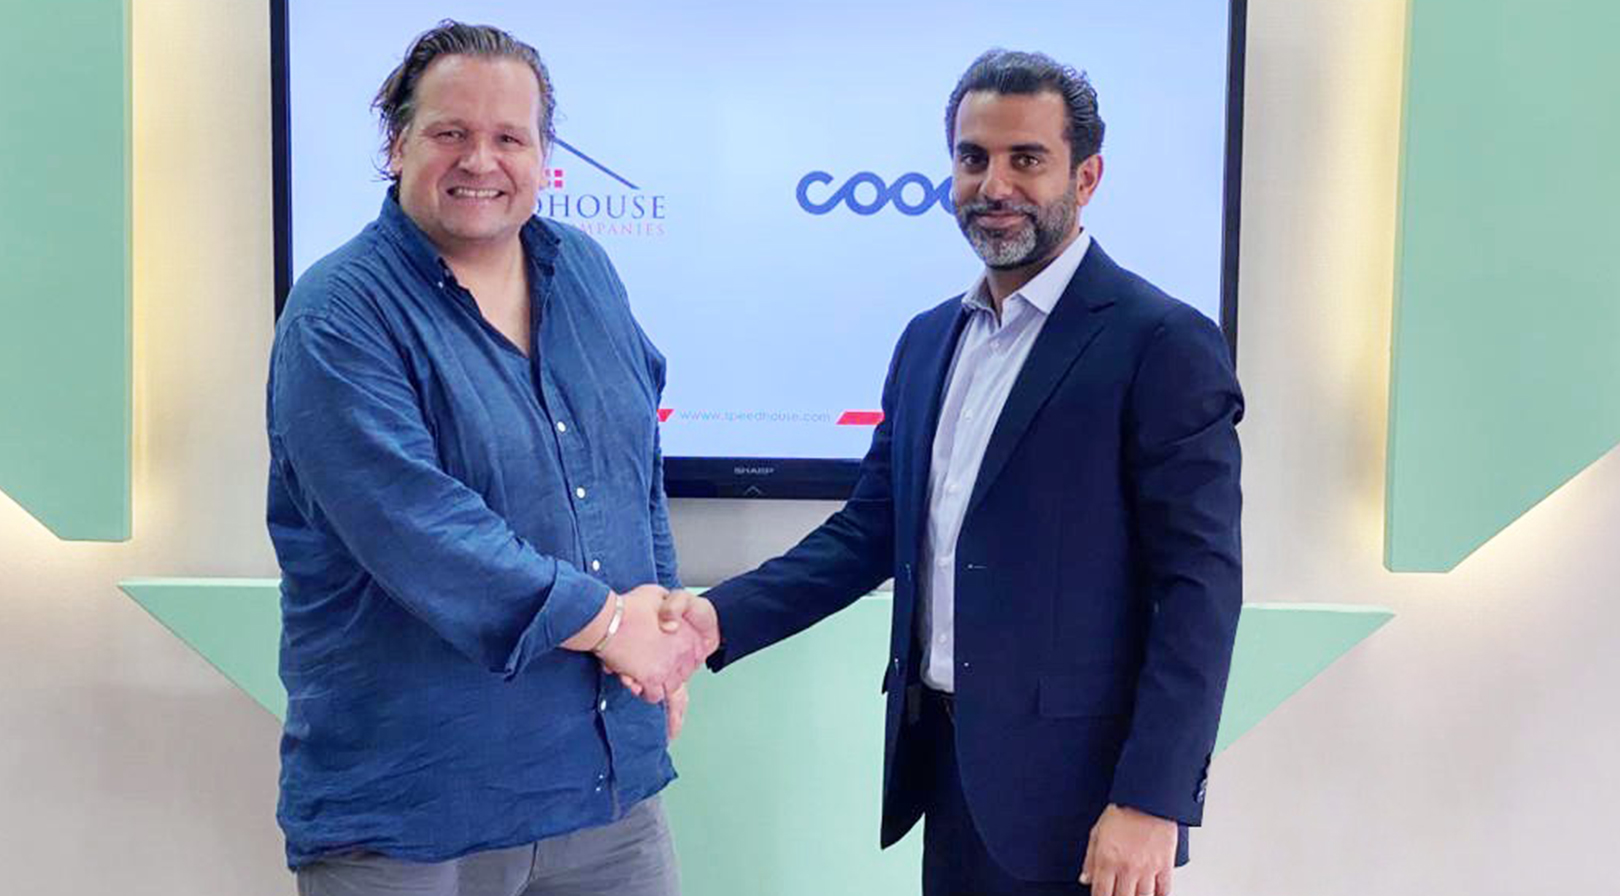 Speed House is now the exclusive producer and distributor for COODOS housing units in UAE.